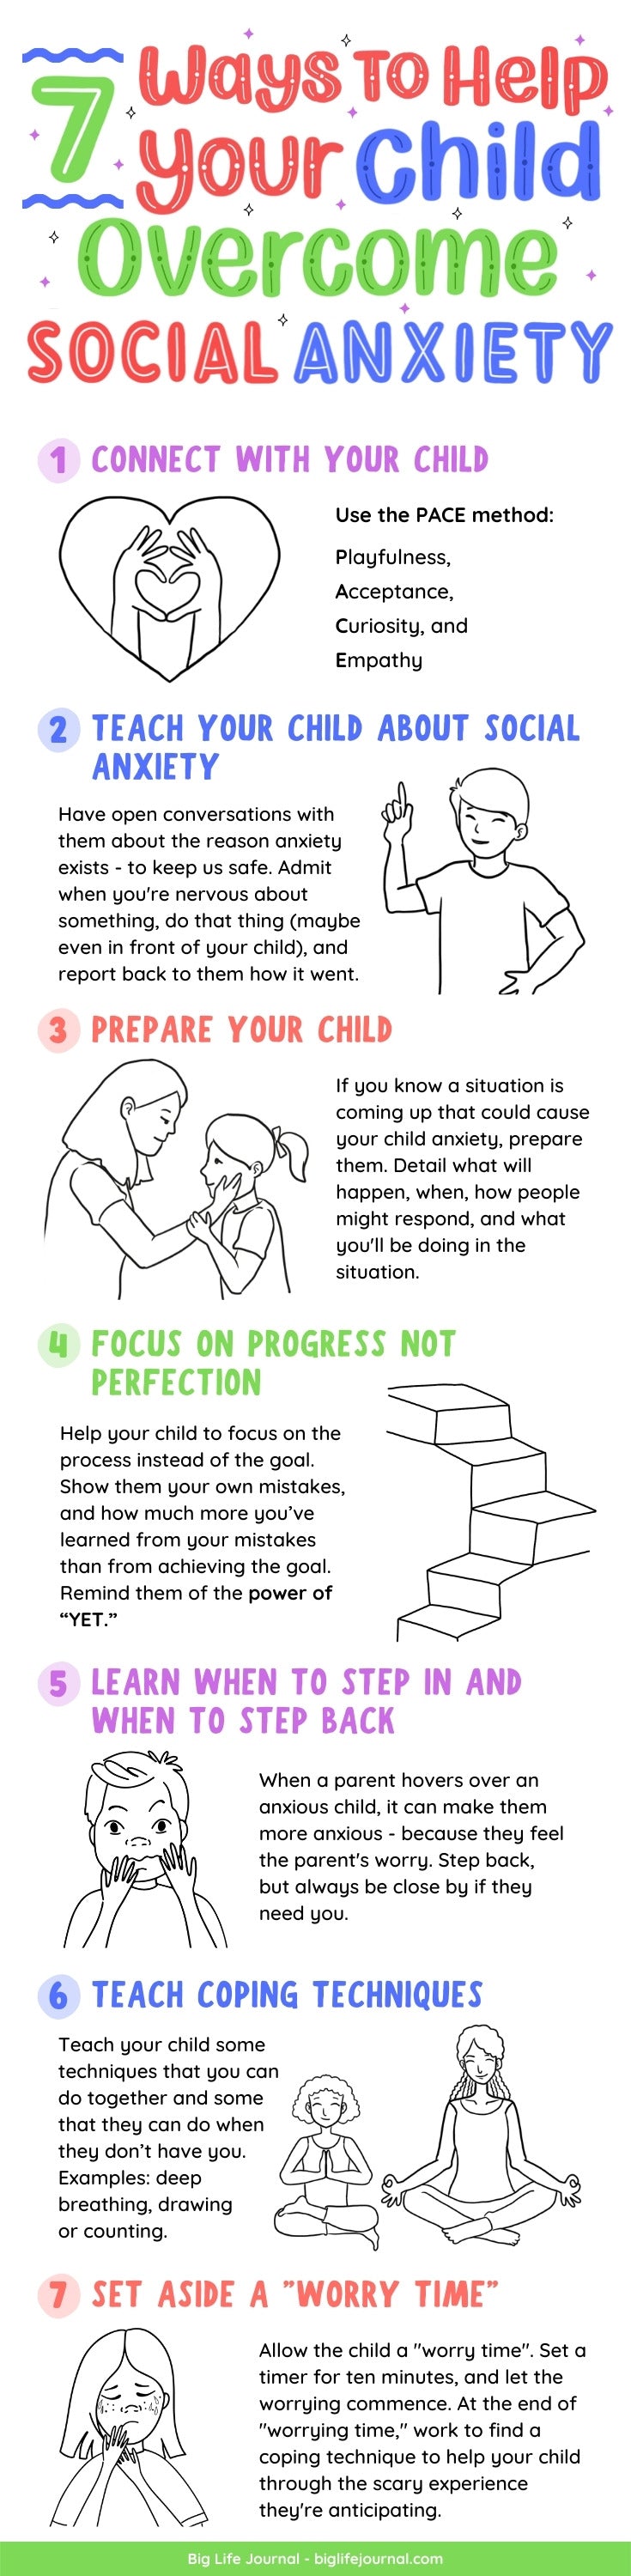 Effective Ways to Help Children Overcome Social Anxiety